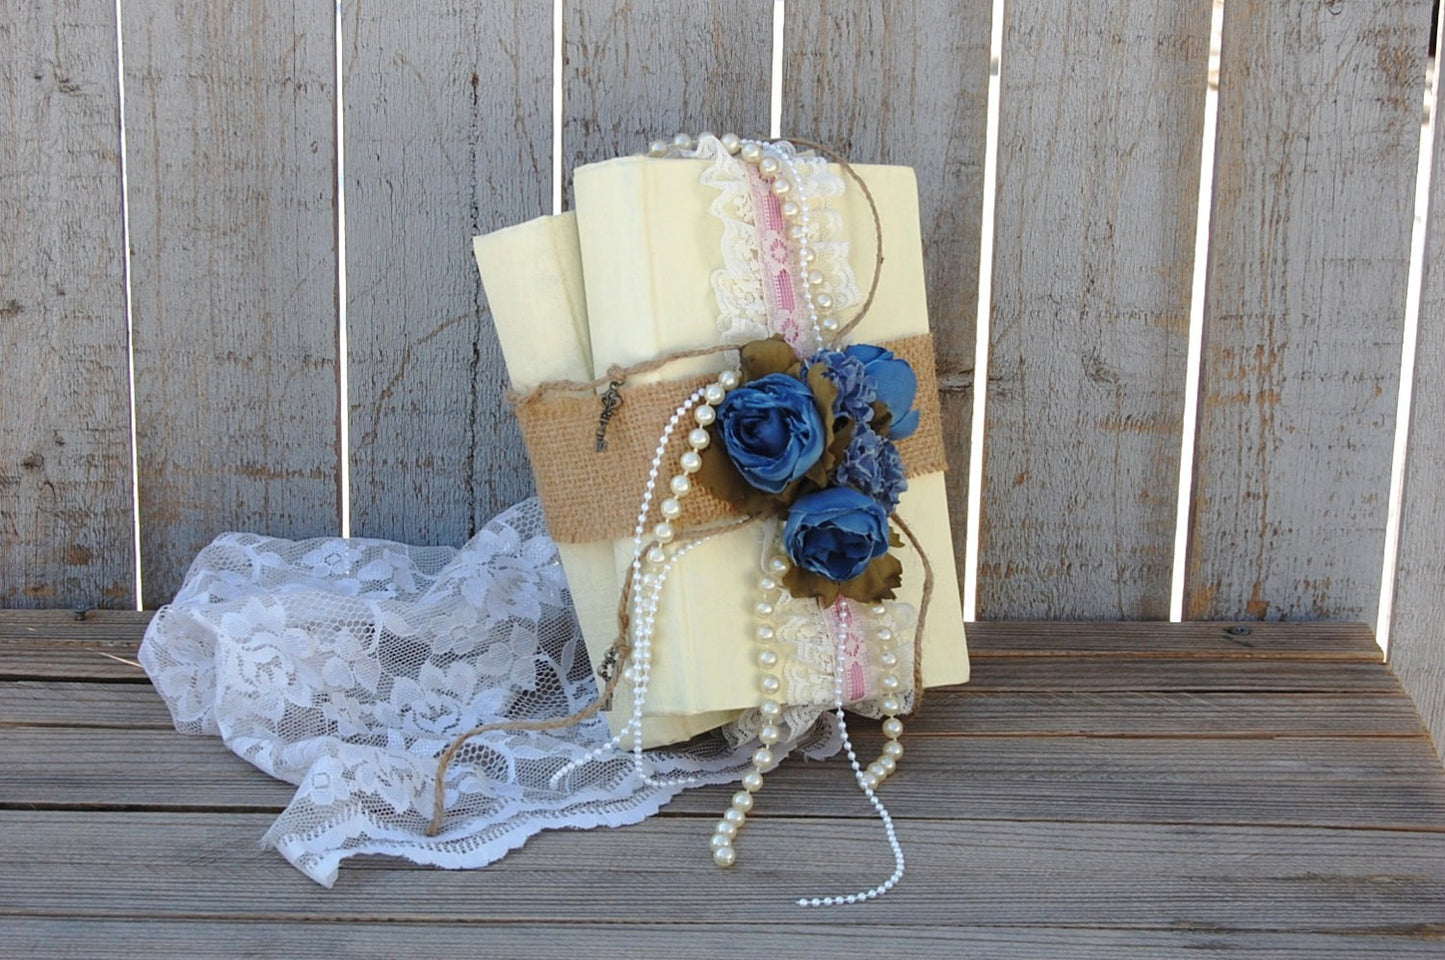 Upcycled Vintage Book Decor